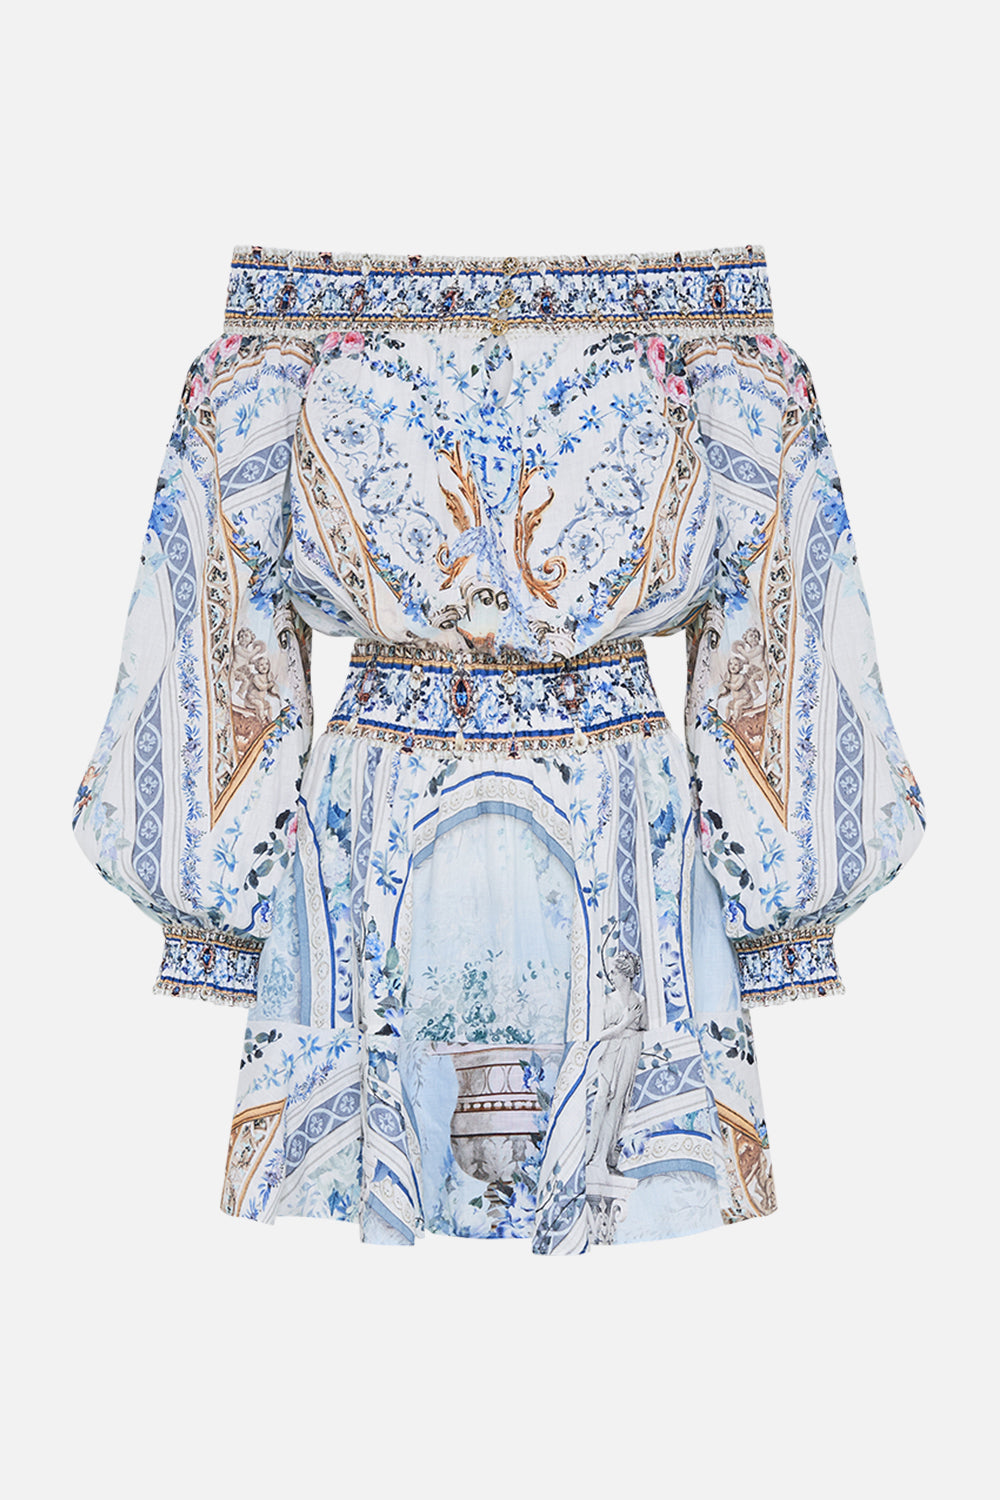 Product view of CAMILLA designer off the shoulder mini dress in Season of the Siren print